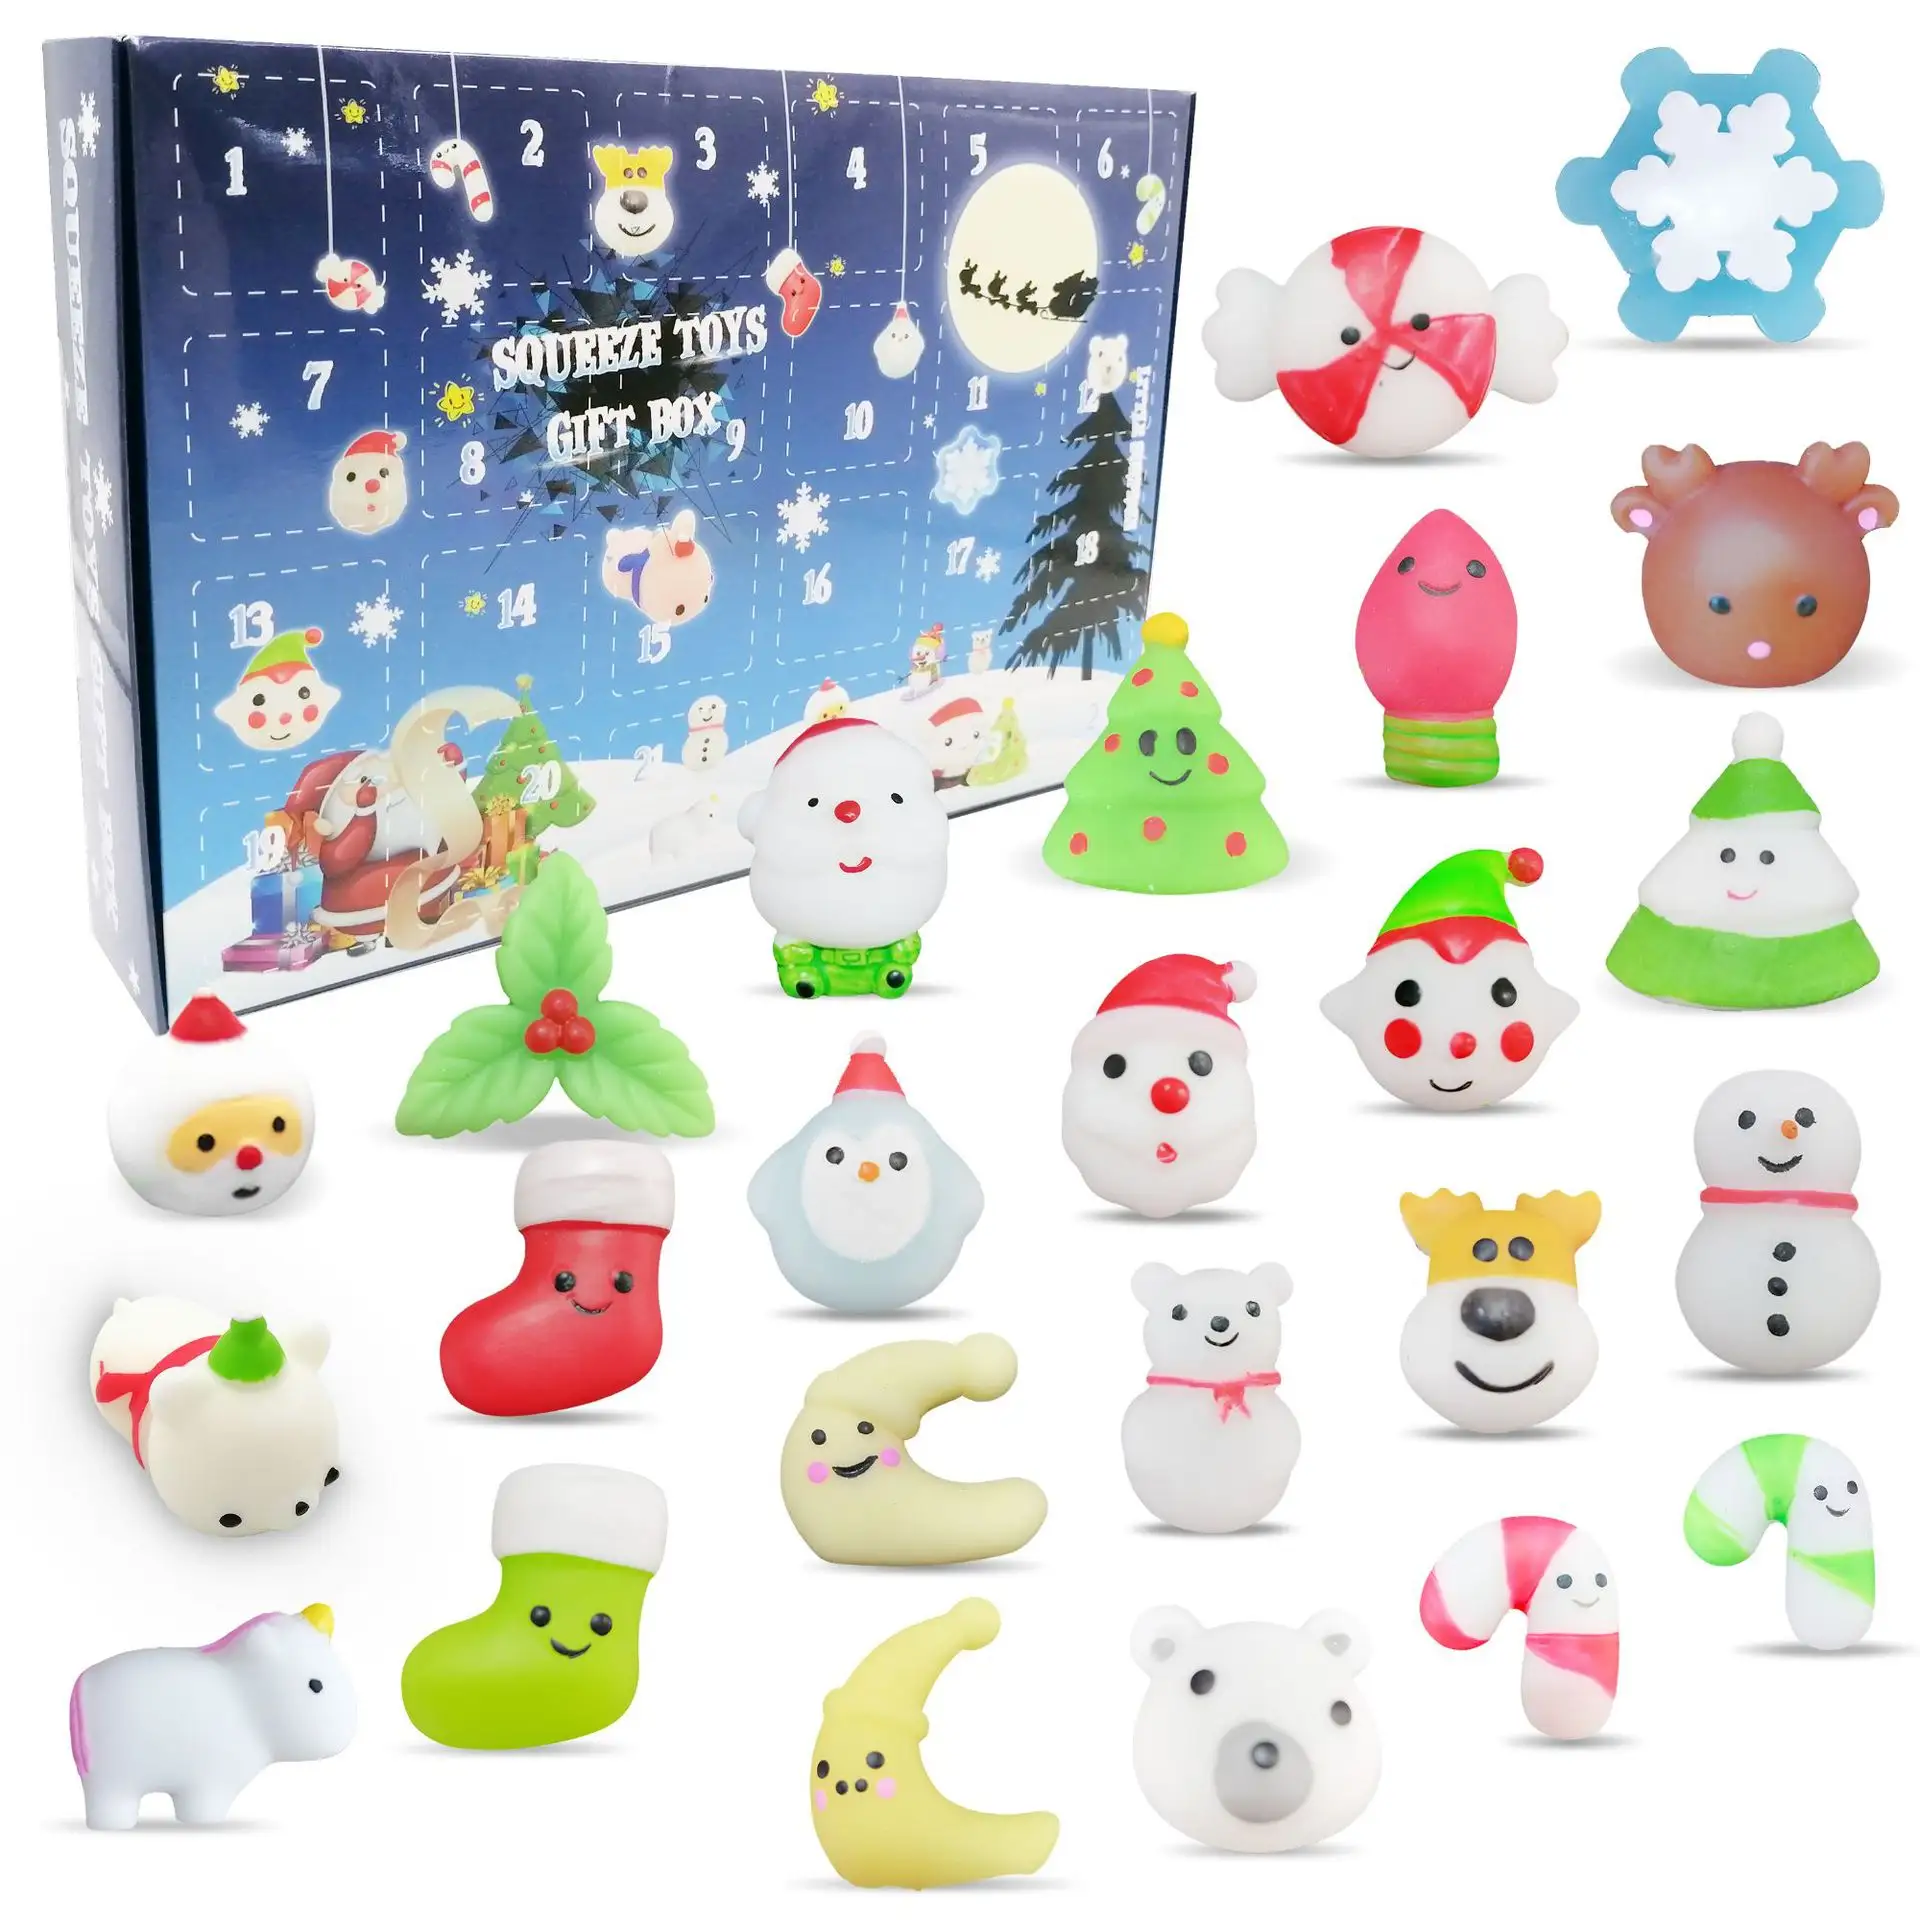 24pcs set Squishy Stress Blind Box fidget Toys Christmas Mochi Squeeze Mystery Box Decompression Toys New year gift